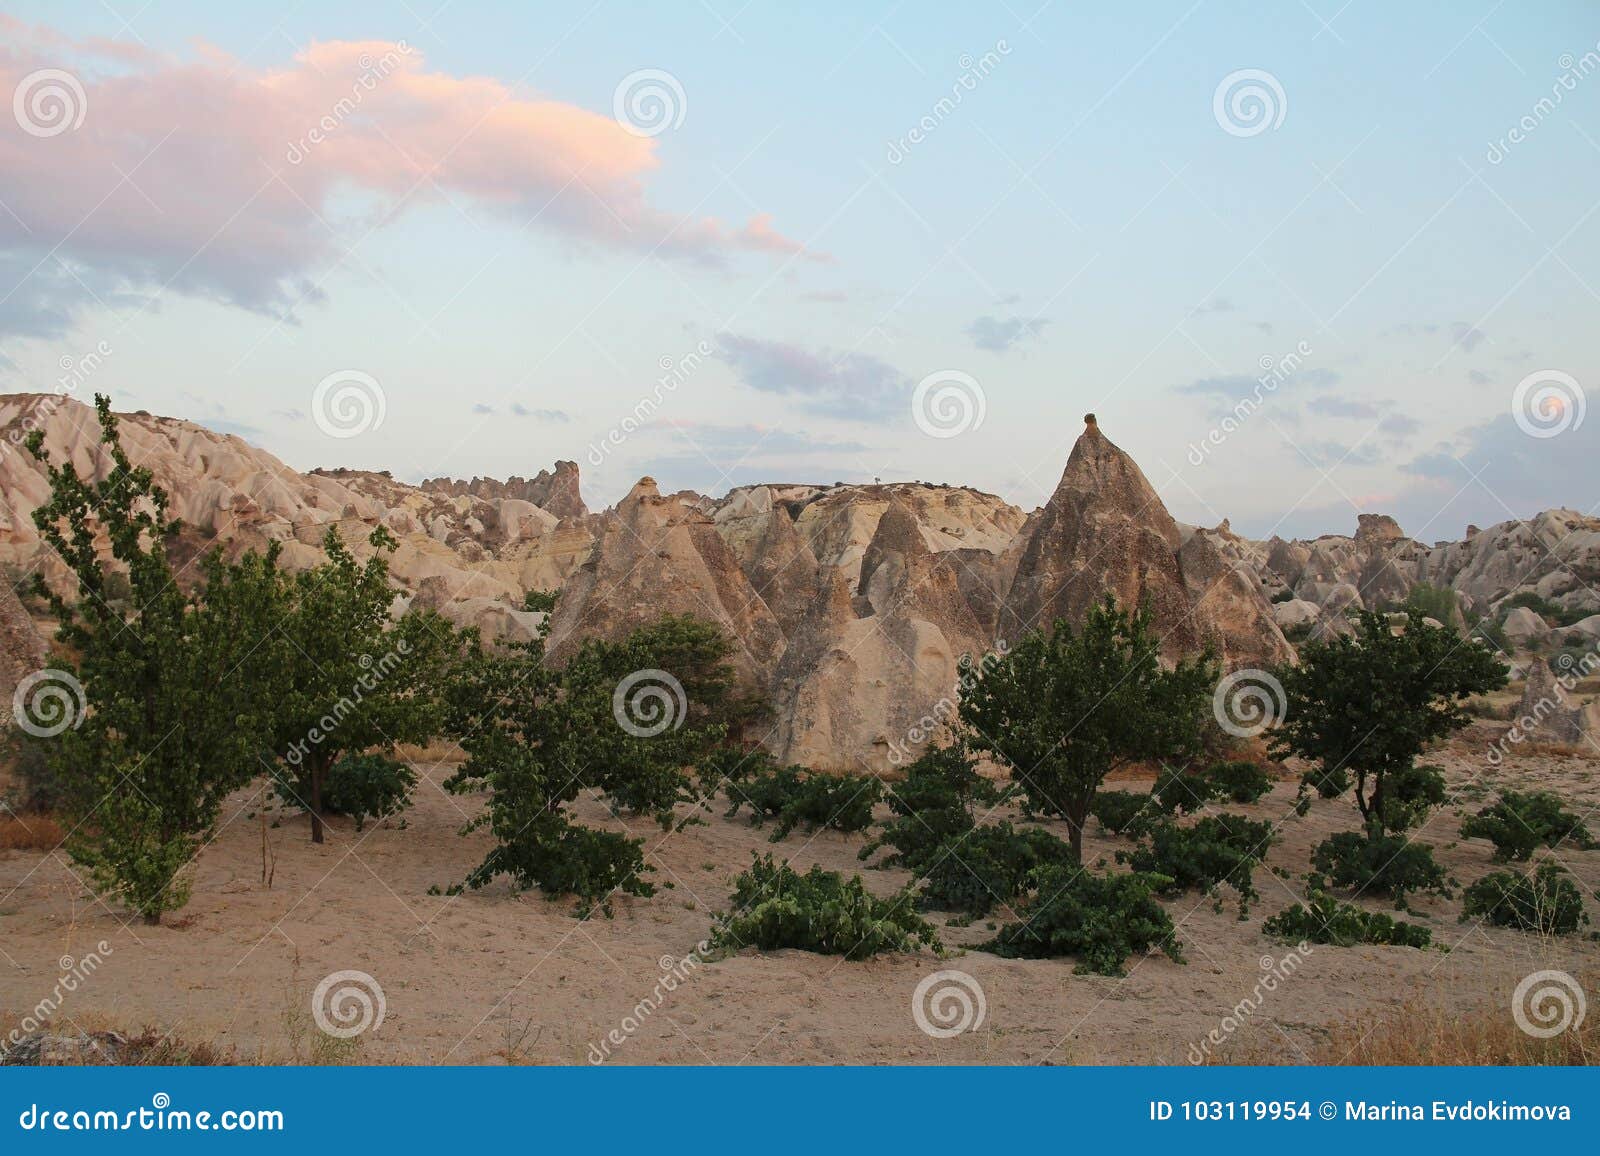 Natural Valley With Volcanic Tuff Stone Rocks In Goreme In ...